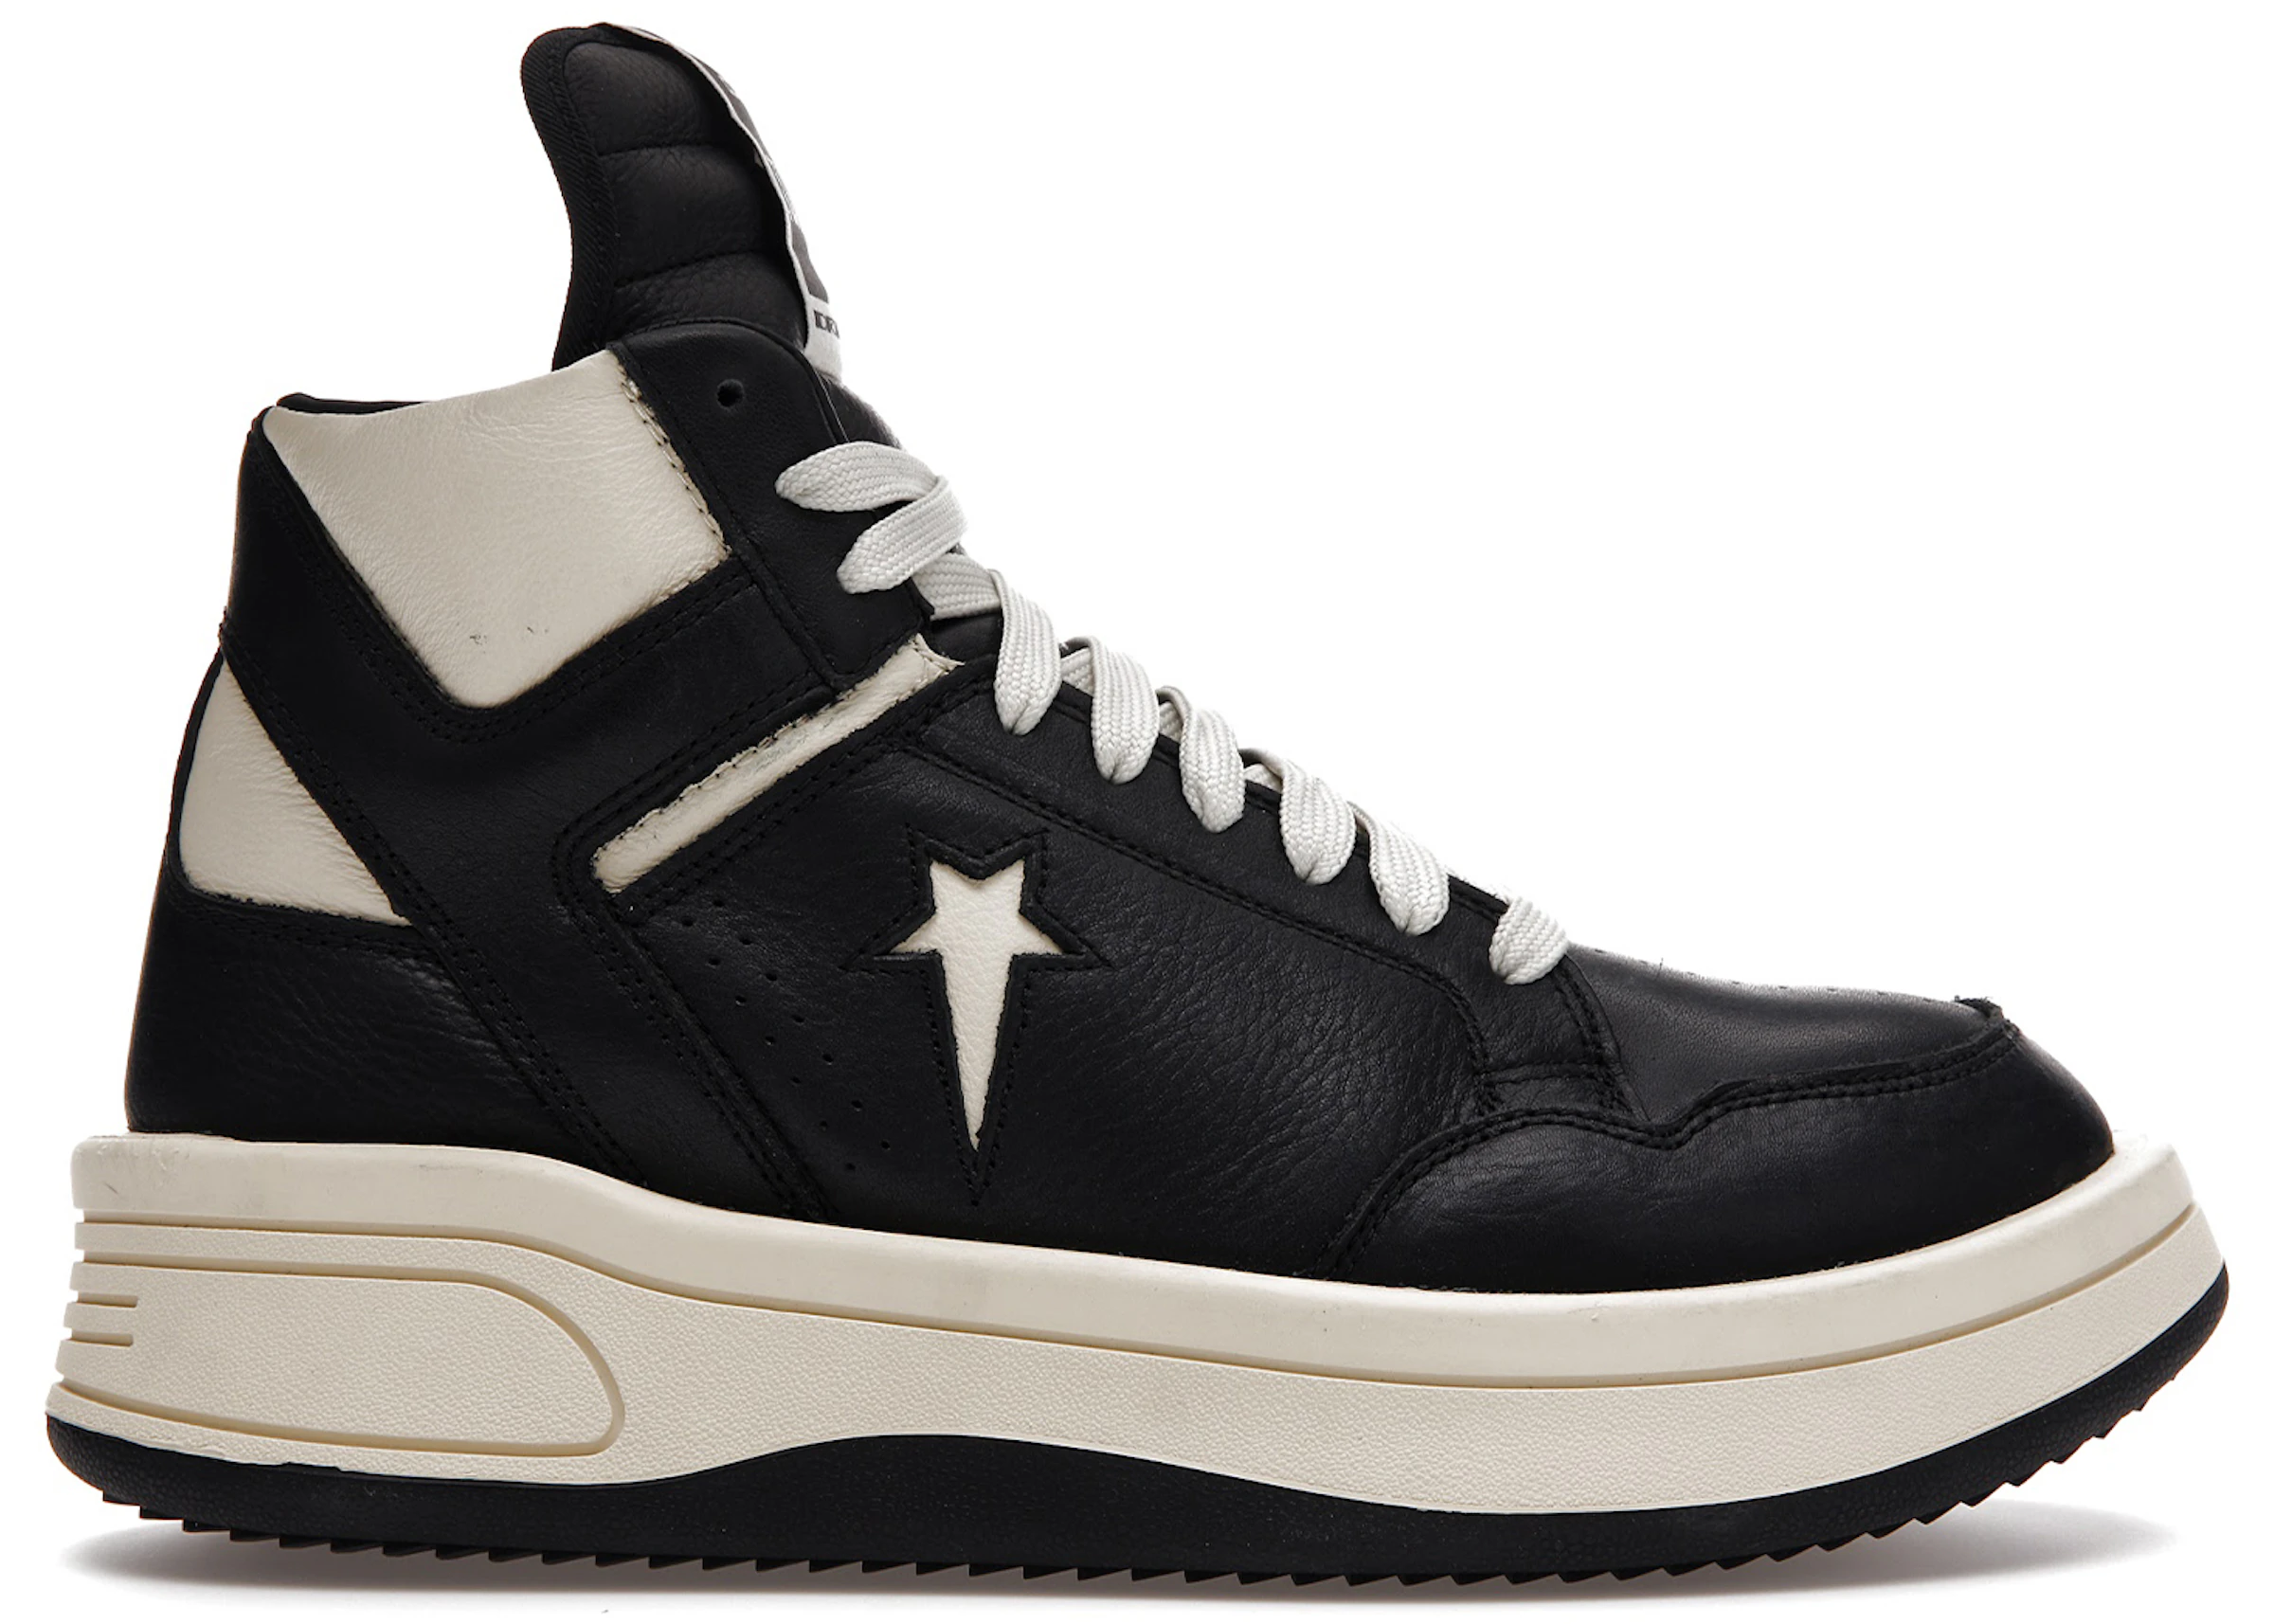 Buy Converse Shoes & New Sneakers - StockX